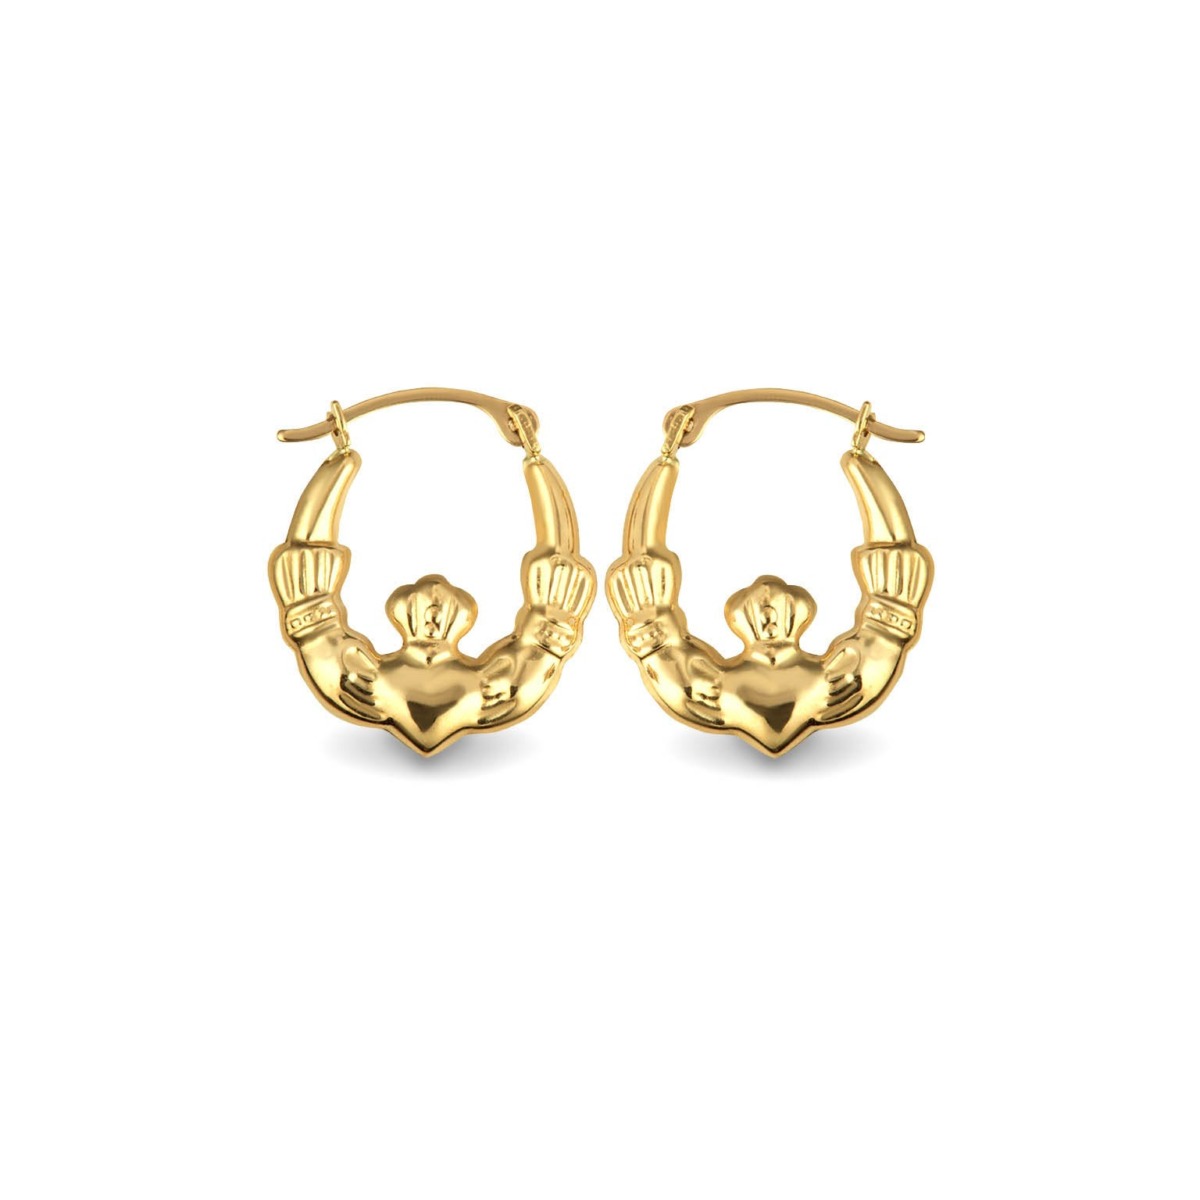 Gents Earrings in Gold at Gold Boutique GOOFASH